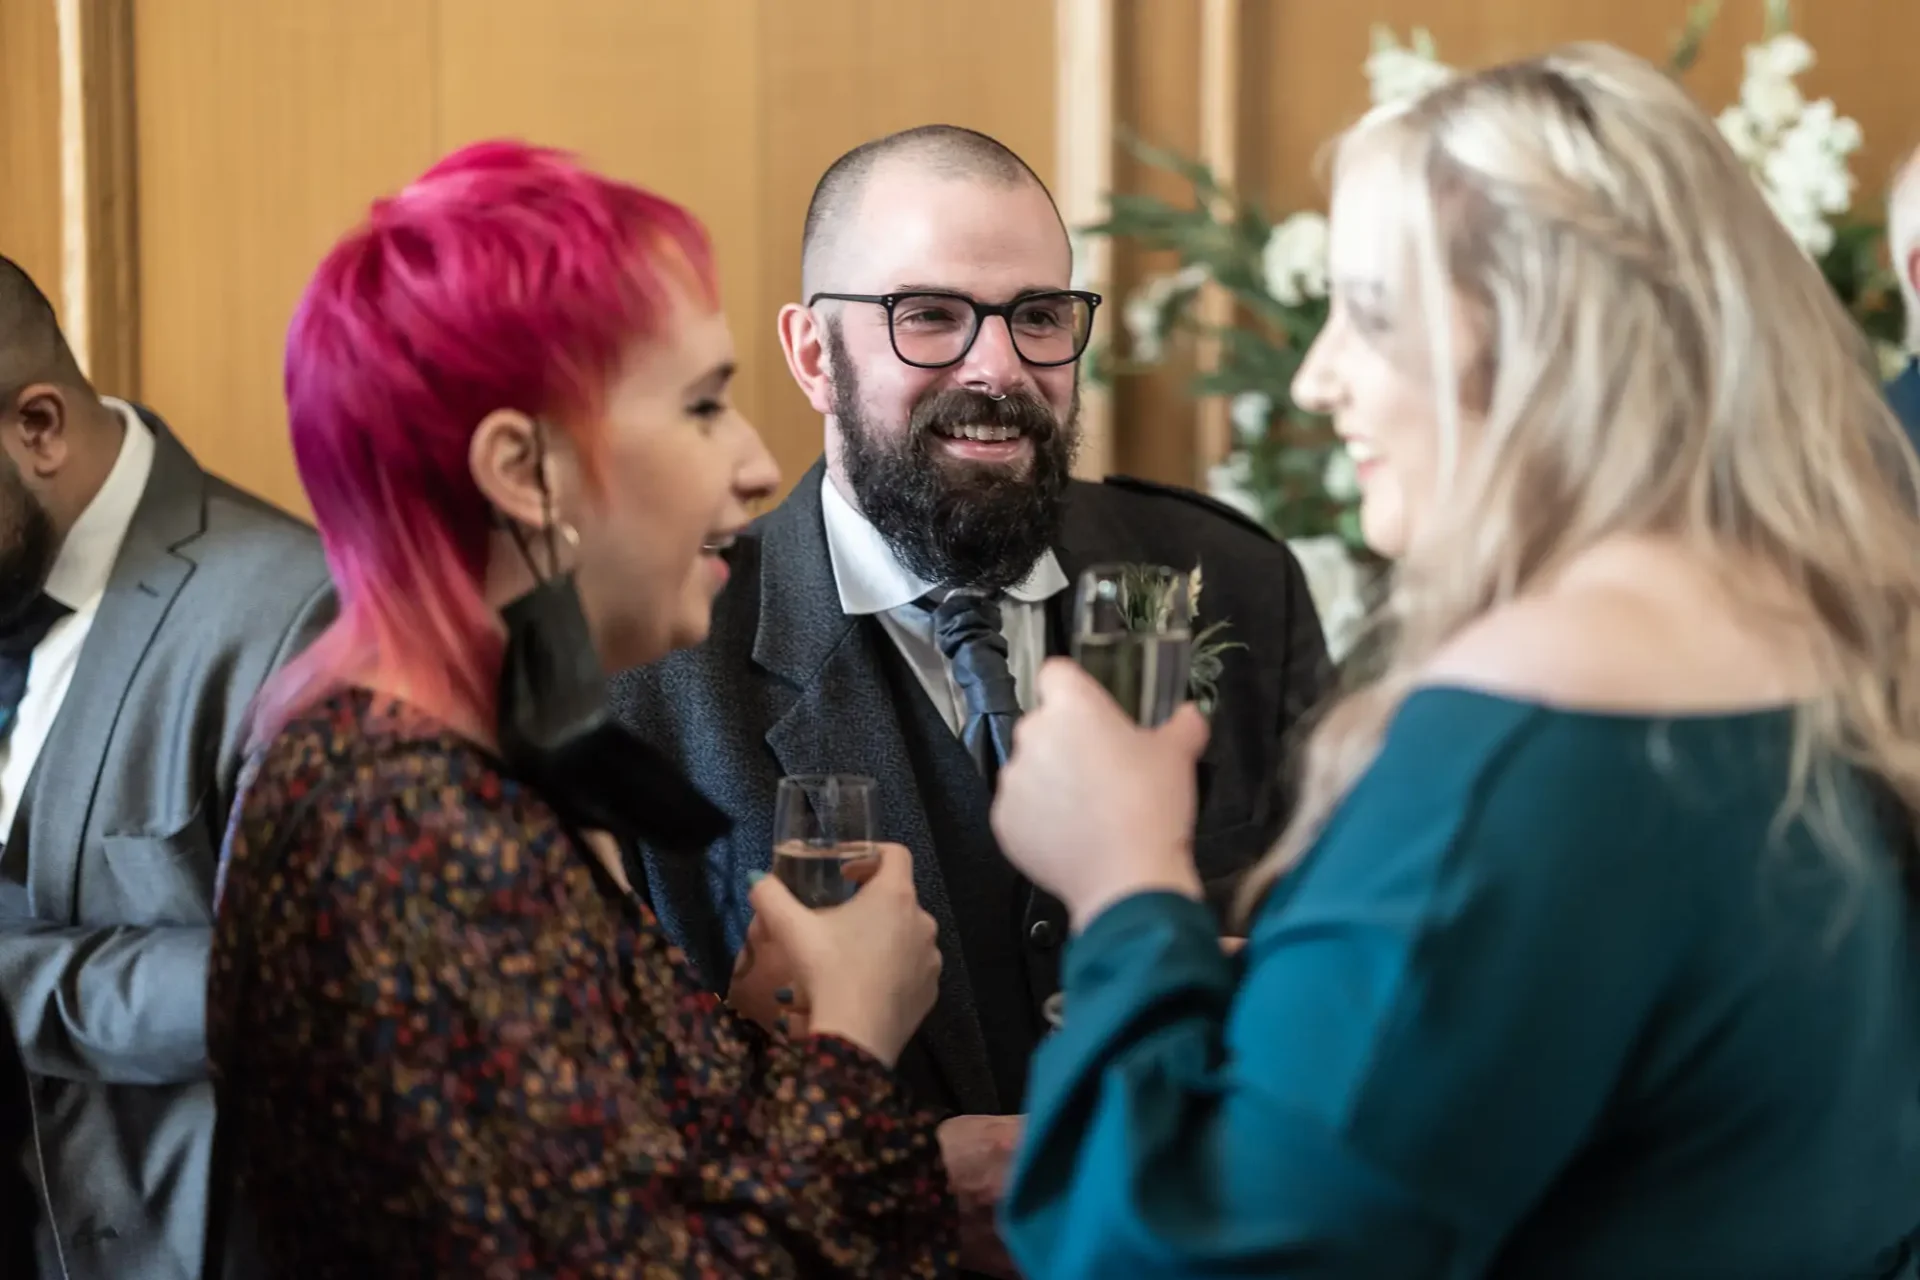 Group of people conversing happily at a formal event, one man in a suit and two women, one with pink hair, holding drinks.